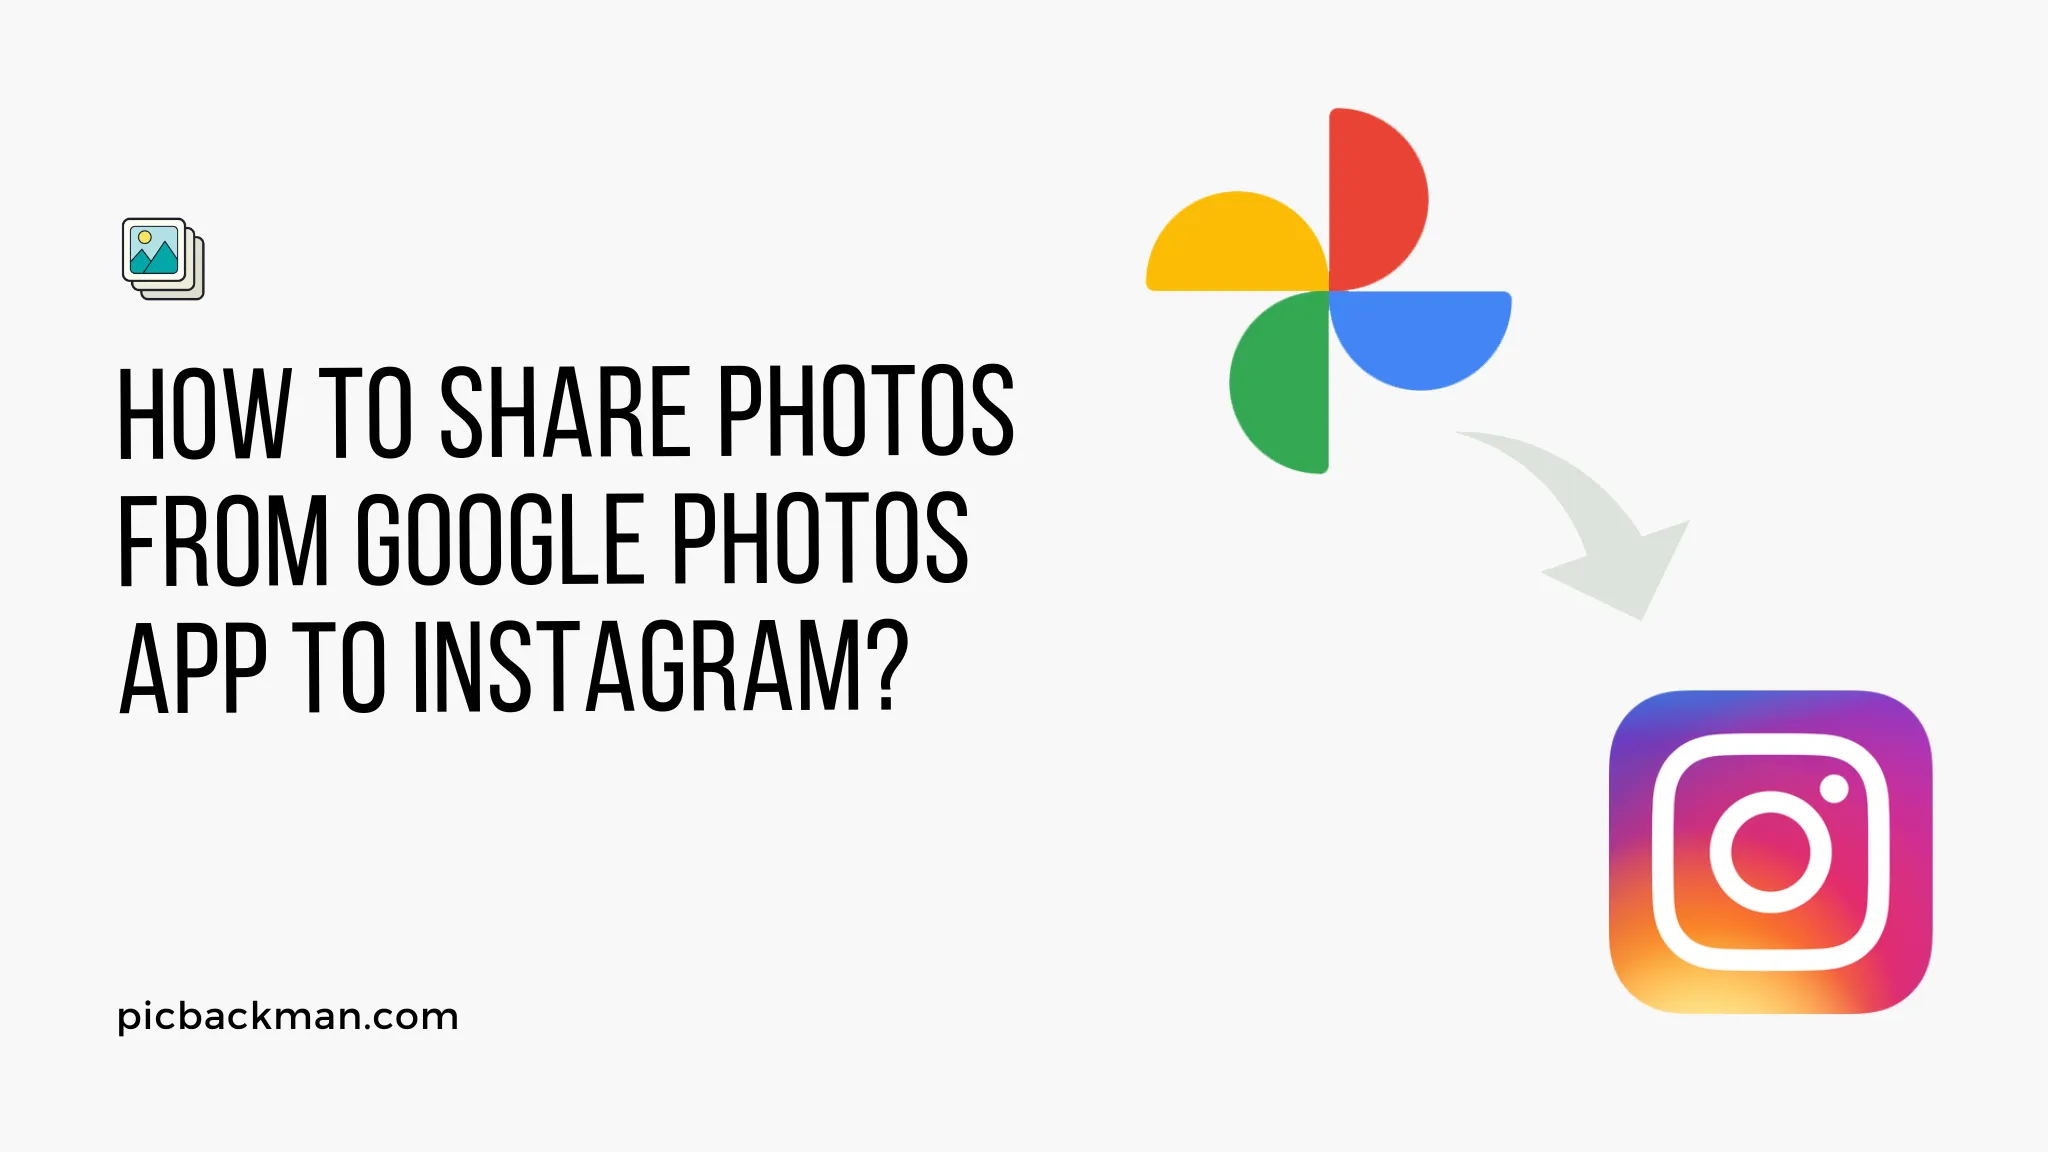 How to Share Photos from Google Photos App to Instagram